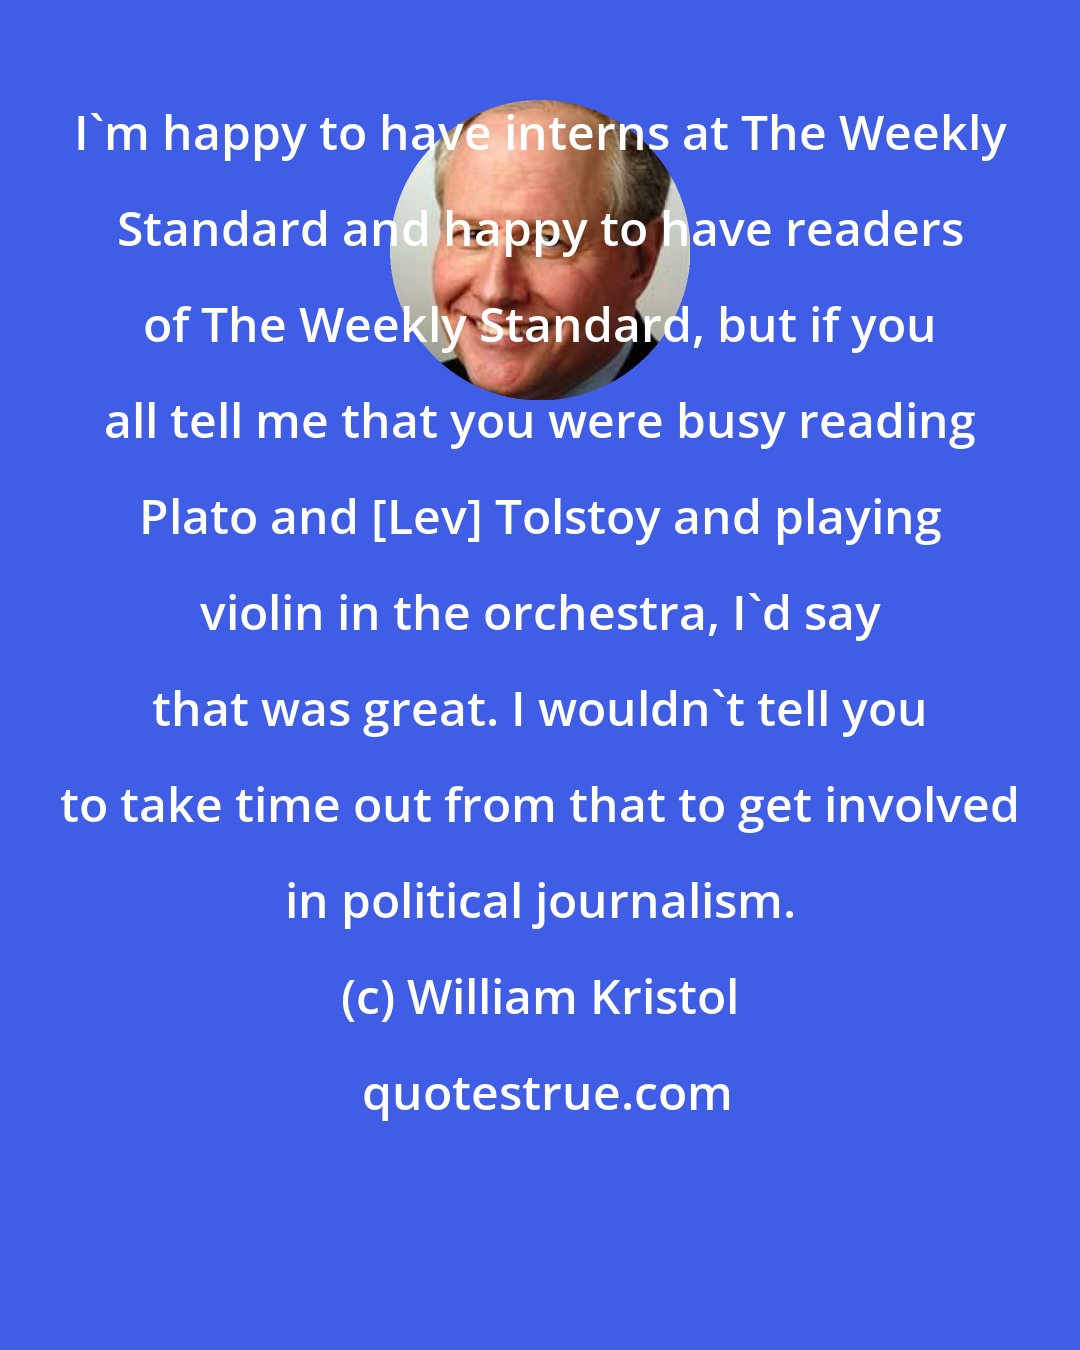 William Kristol: I'm happy to have interns at The Weekly Standard and happy to have readers of The Weekly Standard, but if you all tell me that you were busy reading Plato and [Lev] Tolstoy and playing violin in the orchestra, I'd say that was great. I wouldn't tell you to take time out from that to get involved in political journalism.